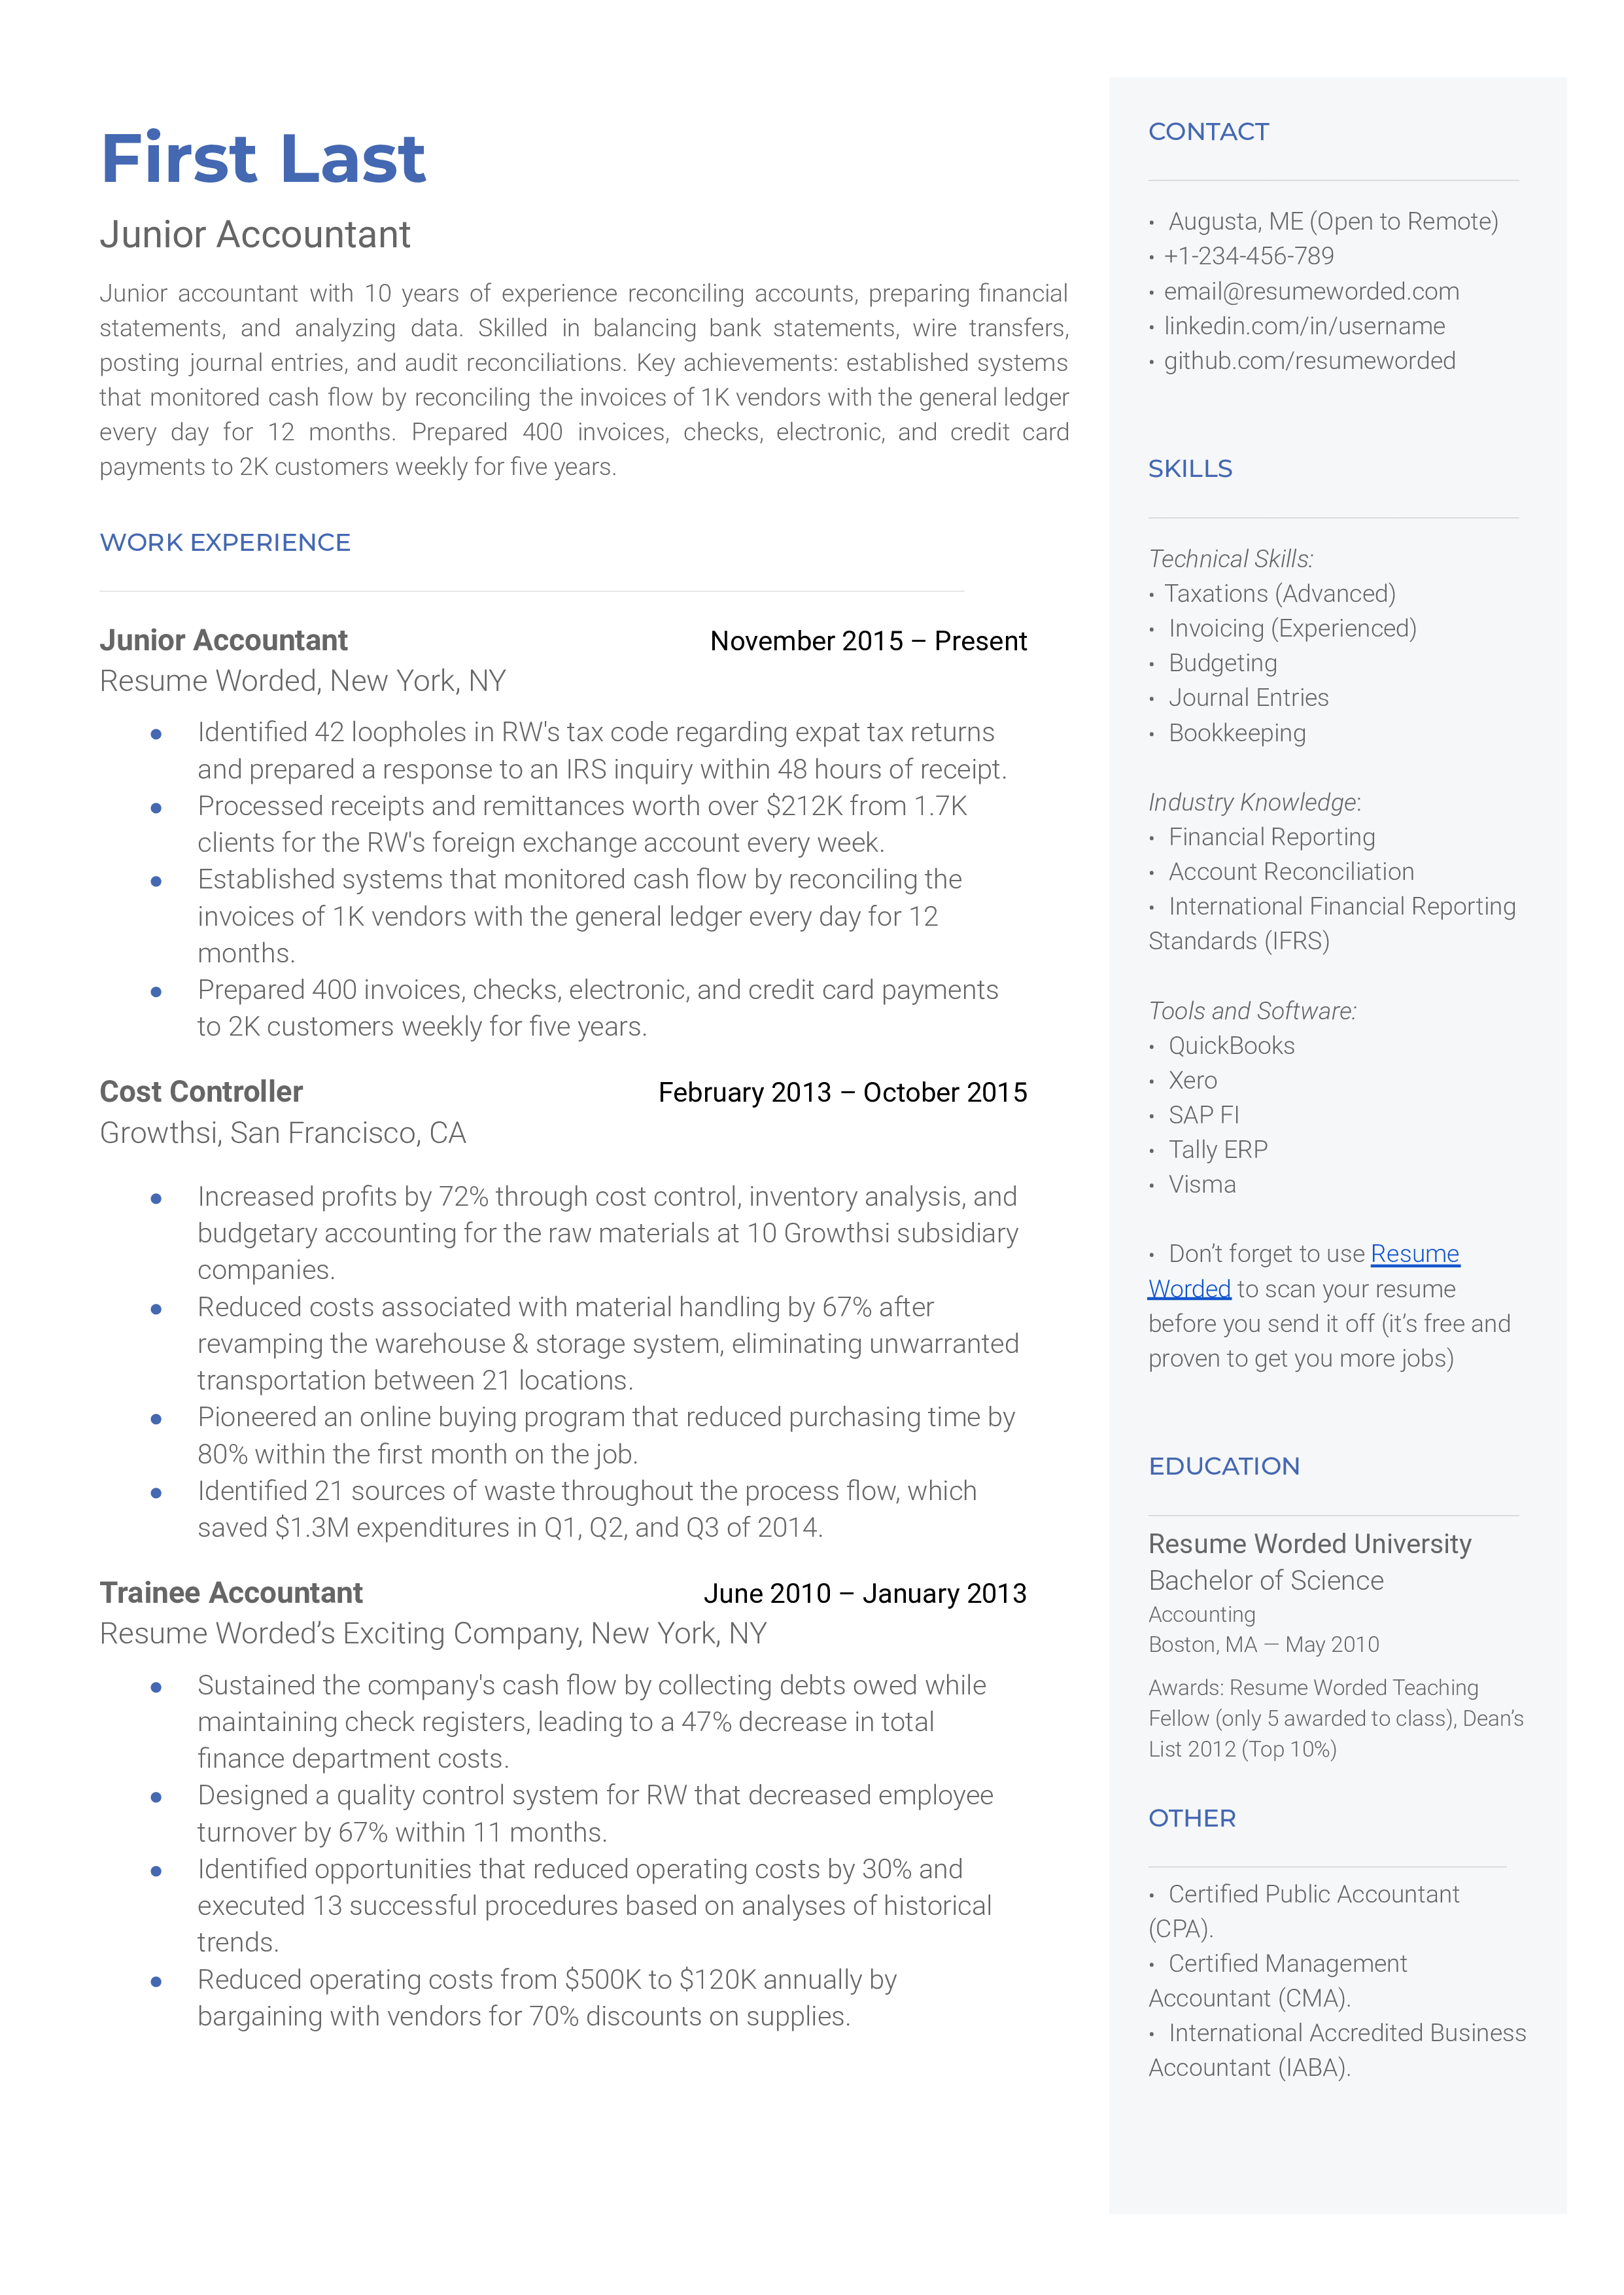 A well-designed CV for a Junior Accountant position showcasing software proficiency and financial analysis skills.